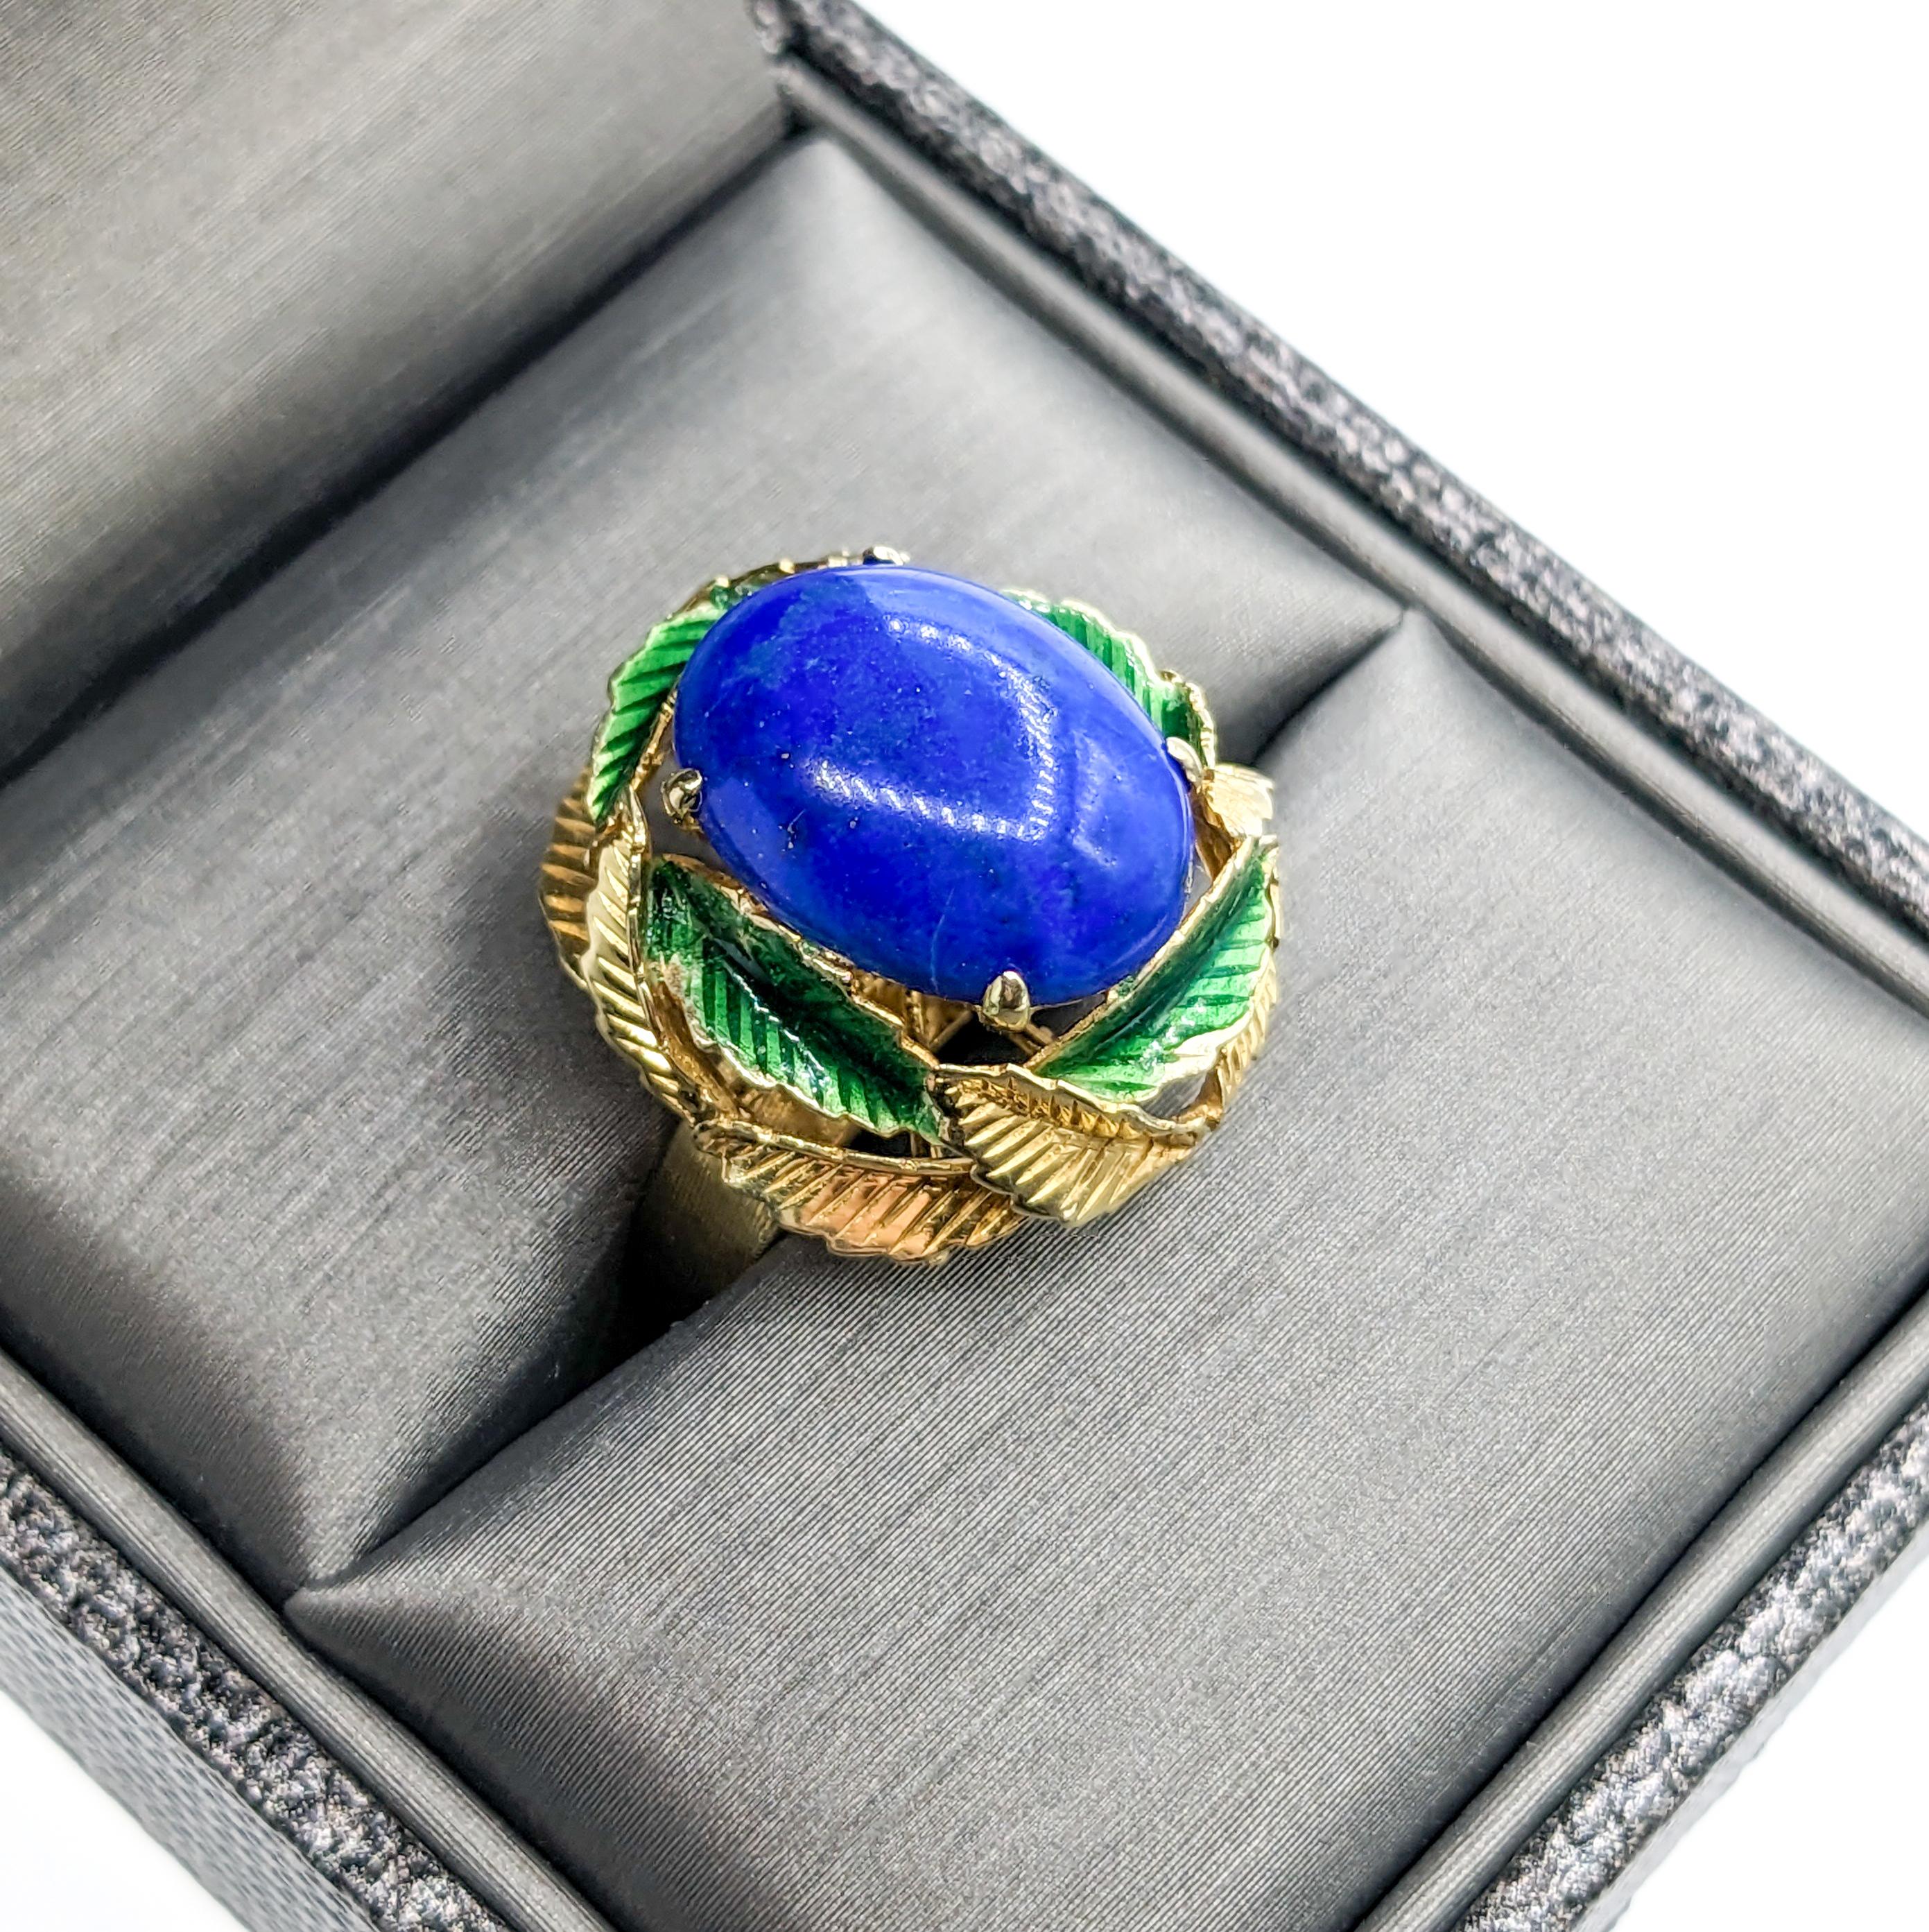 Fantastic Lapis Cabochon Ring with Enamel Leaf Details in Gold

Introducing this lovely handcrafted vintage lapis cabochon ring in 14K yellow gold. Featuring a bright 14.5x10.5mm Lapis stone as its centerpiece, this gorgeous vintage ring makes a